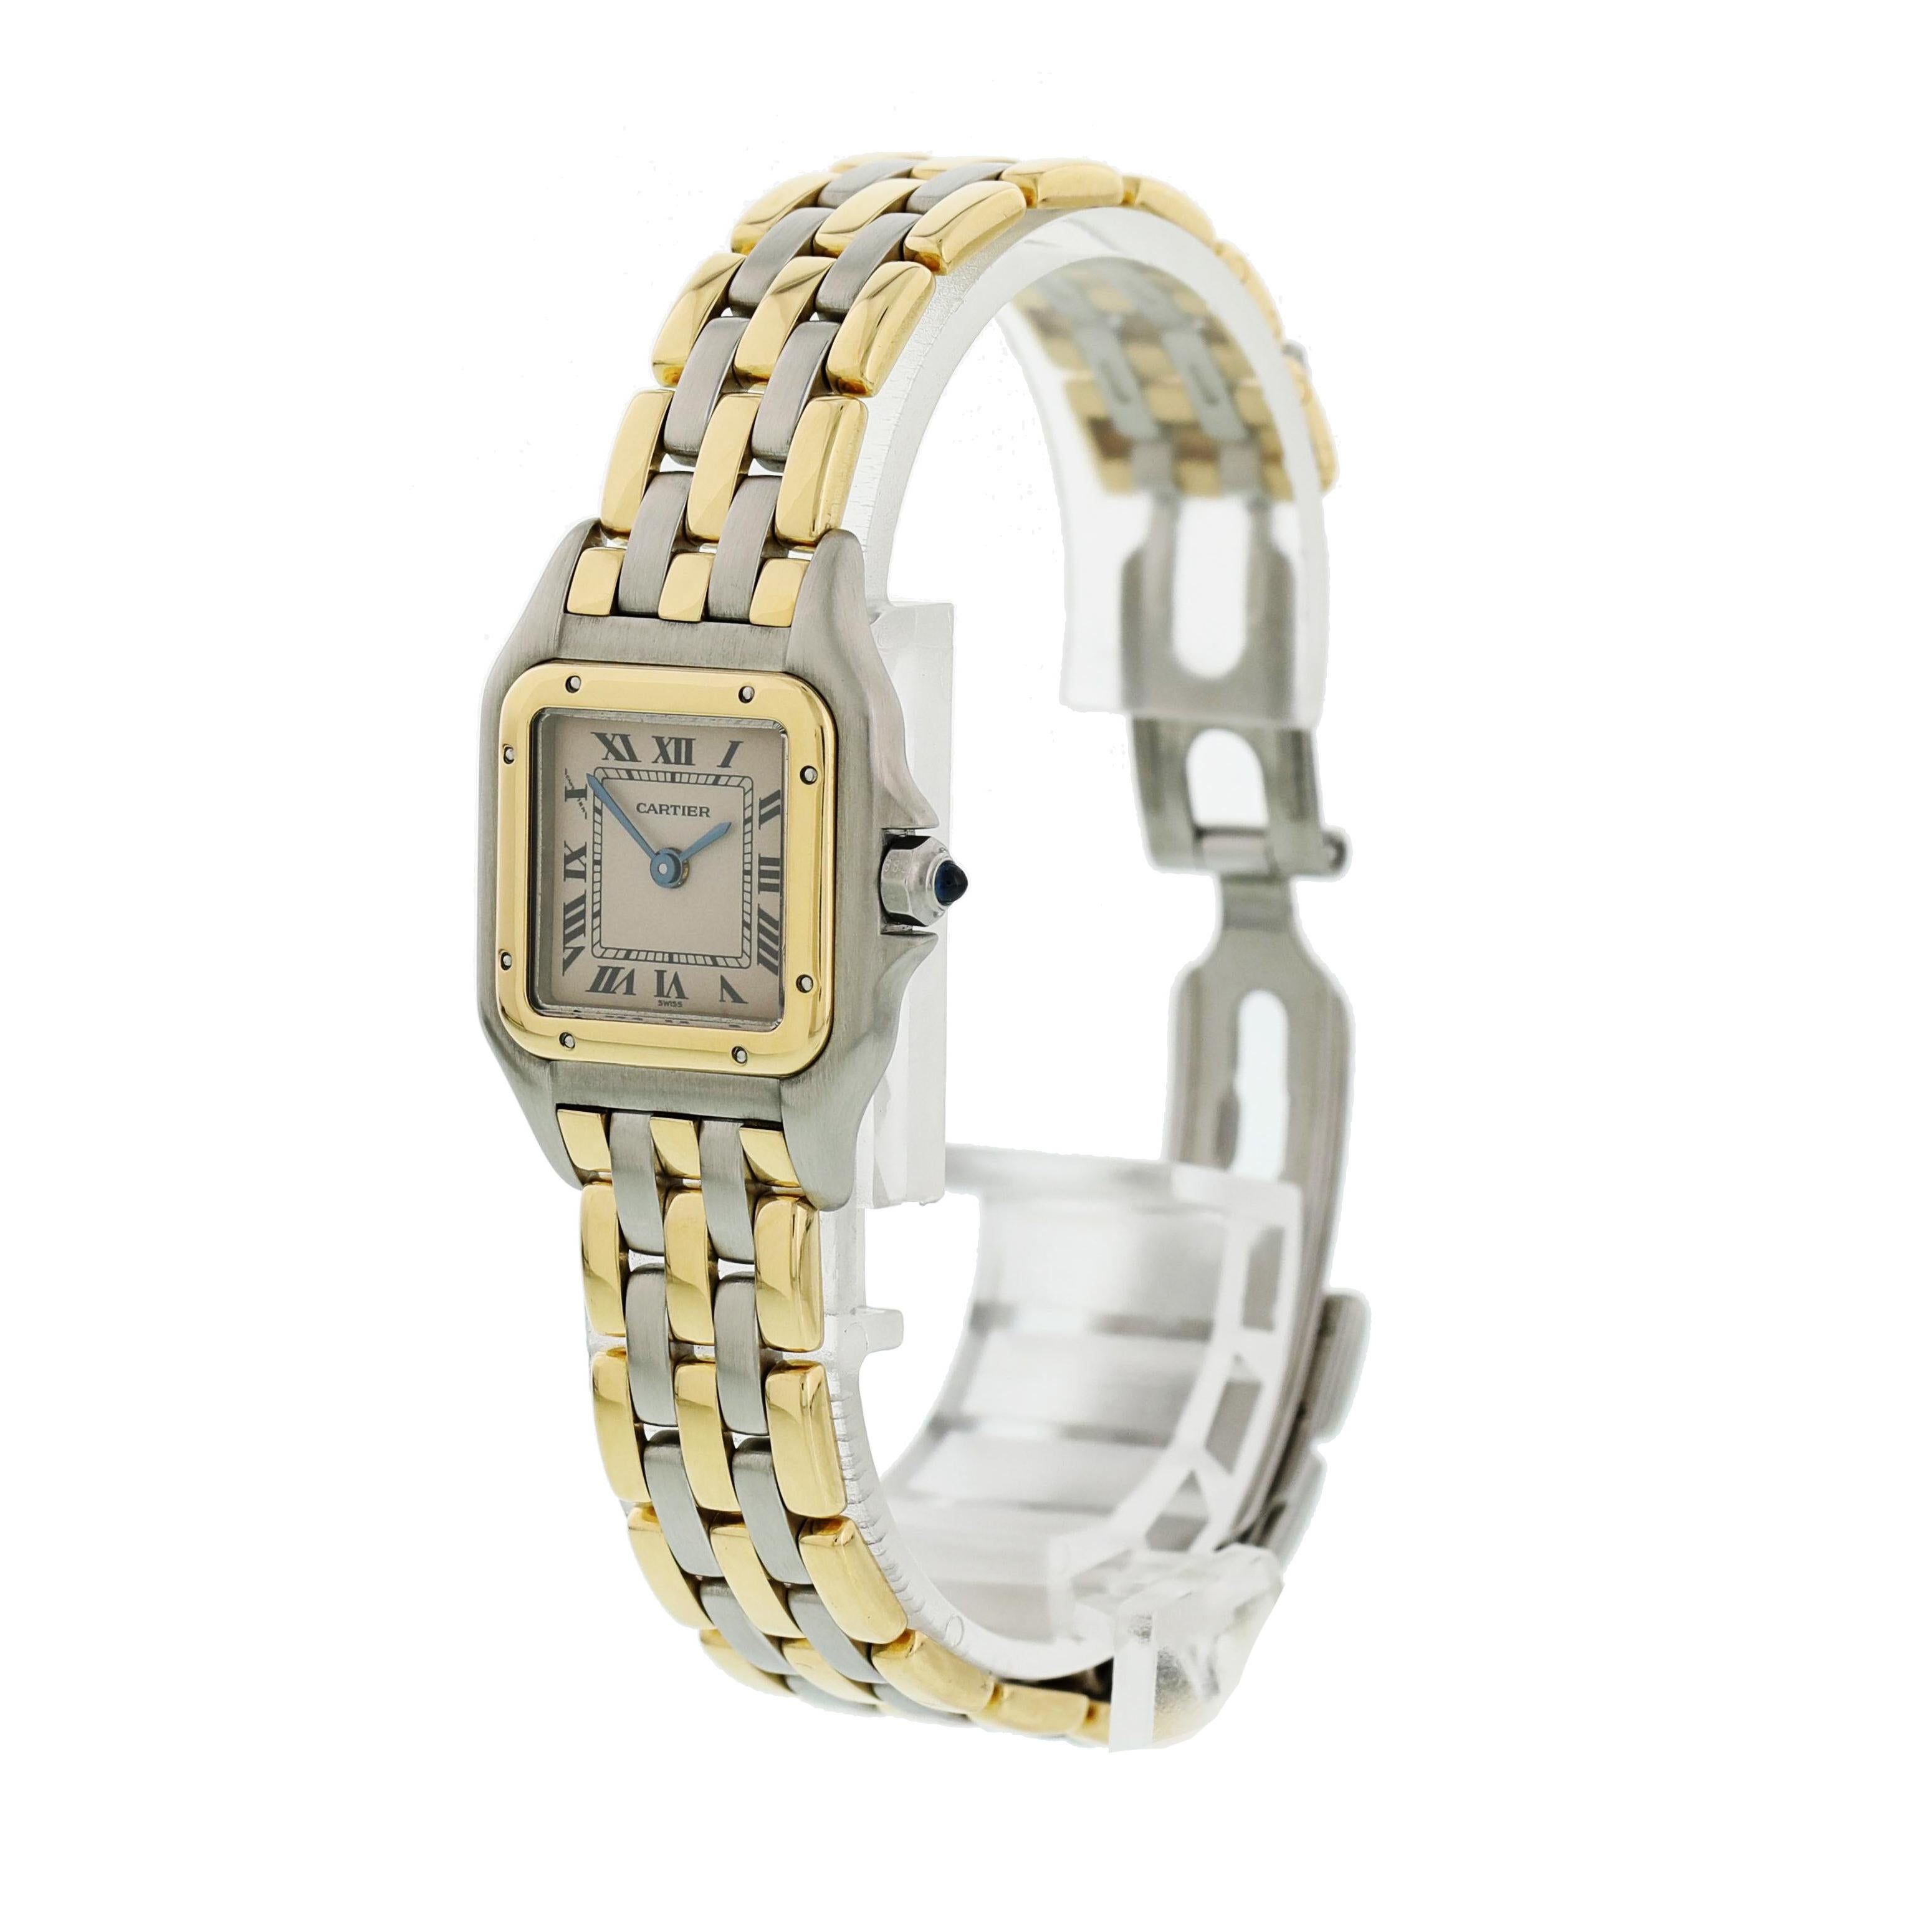 Cartier Panthere Ladies Watch. 
22mm Stainless Steel case. 
Yellow Gold Stationary bezel. 
Off-White dial with Blue steel hands and roman numeral hour markers. 
Minute markers on the outer dial. 
Two Tone Stainless Steel Three Row Bracelet with